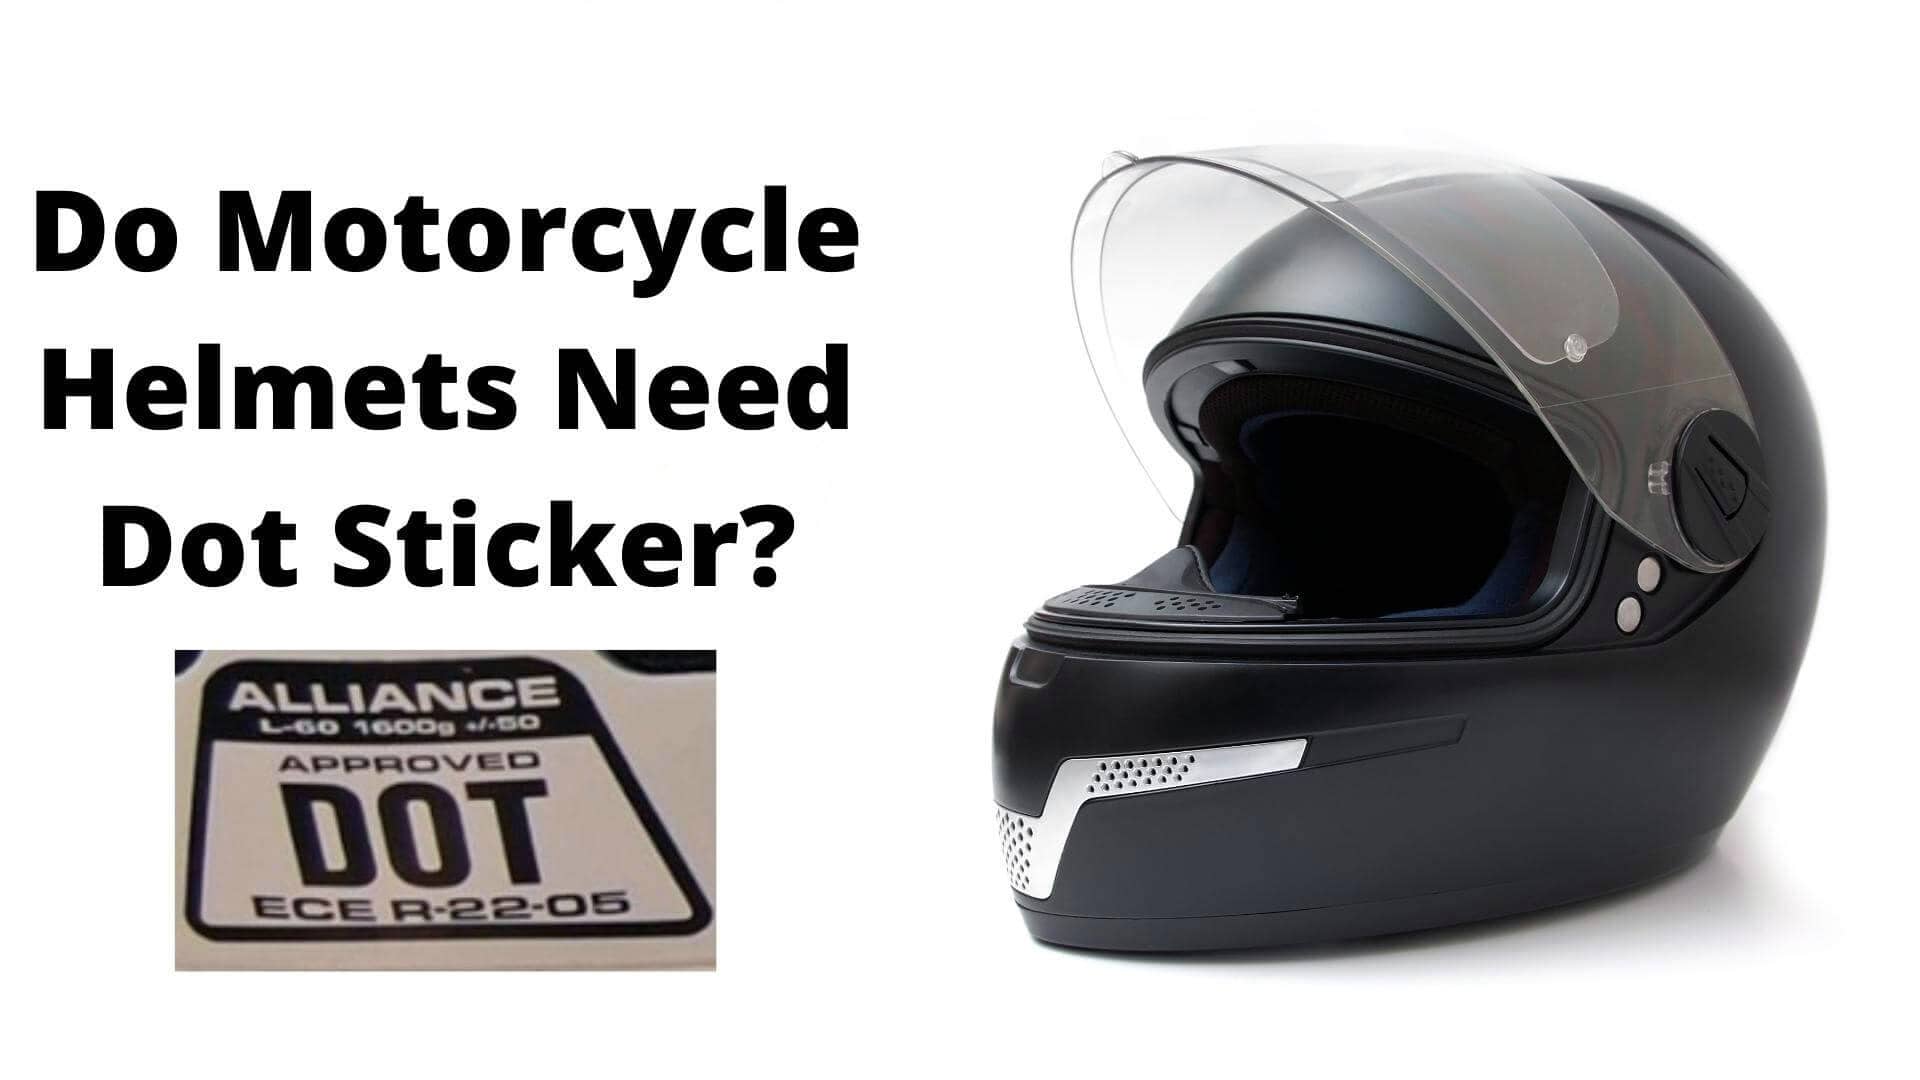 Do Motorcycle Helmets Need Dot Sticker? Here’s What You Need To Know